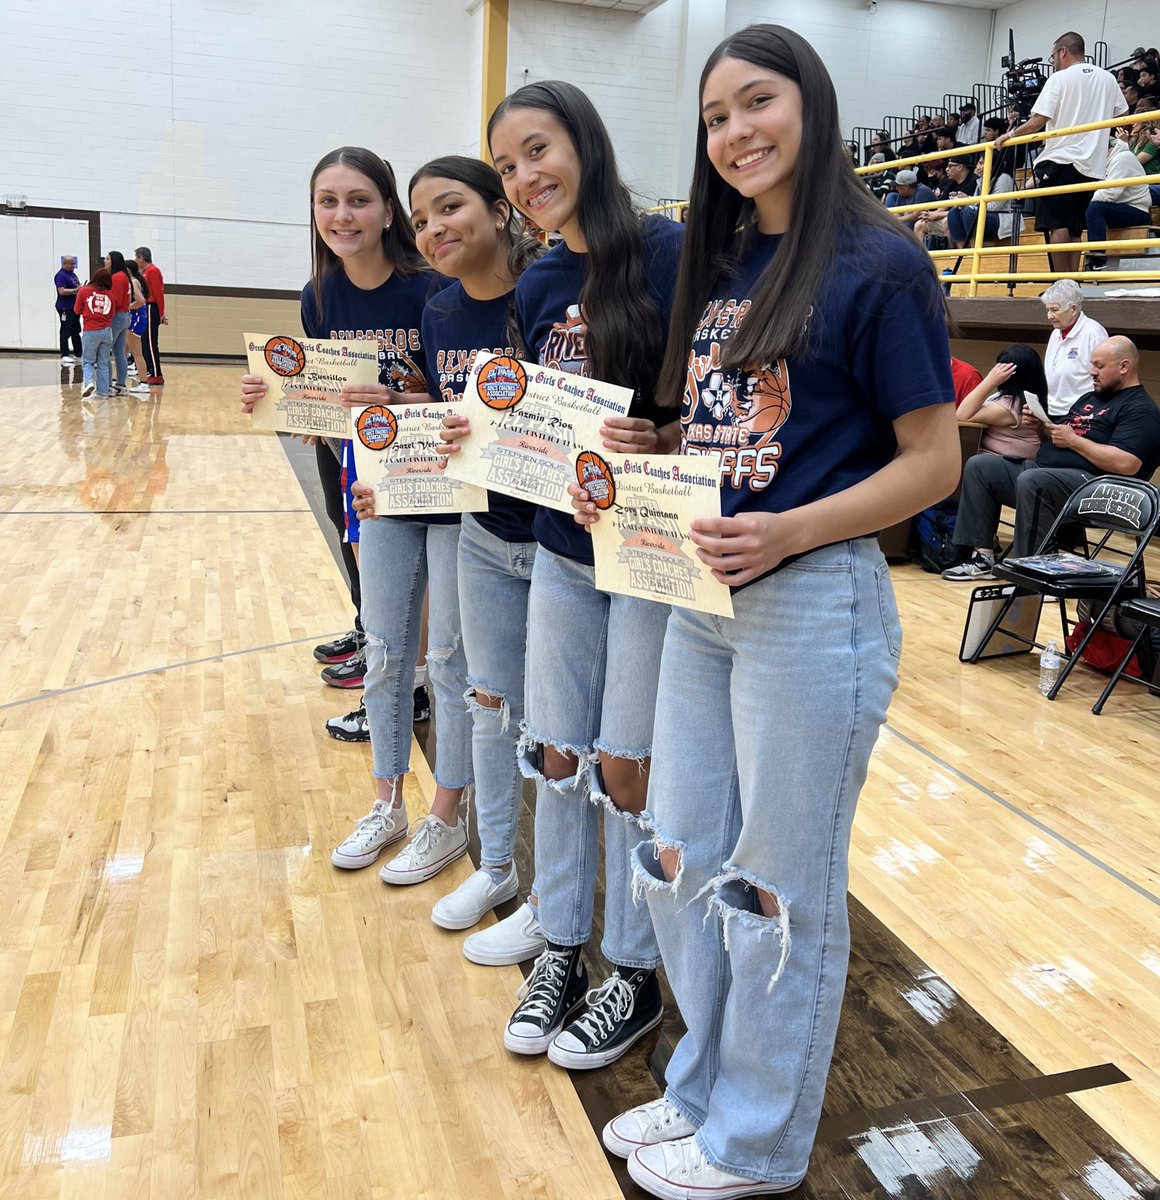 Way to go Ranger coaching staff and thank you @GreaterEl for hosting the All Star Game which honored our Rangers and talented young women from around our city! 🏀🤩  @ssolis3 @abustillos13 #riverside4ever